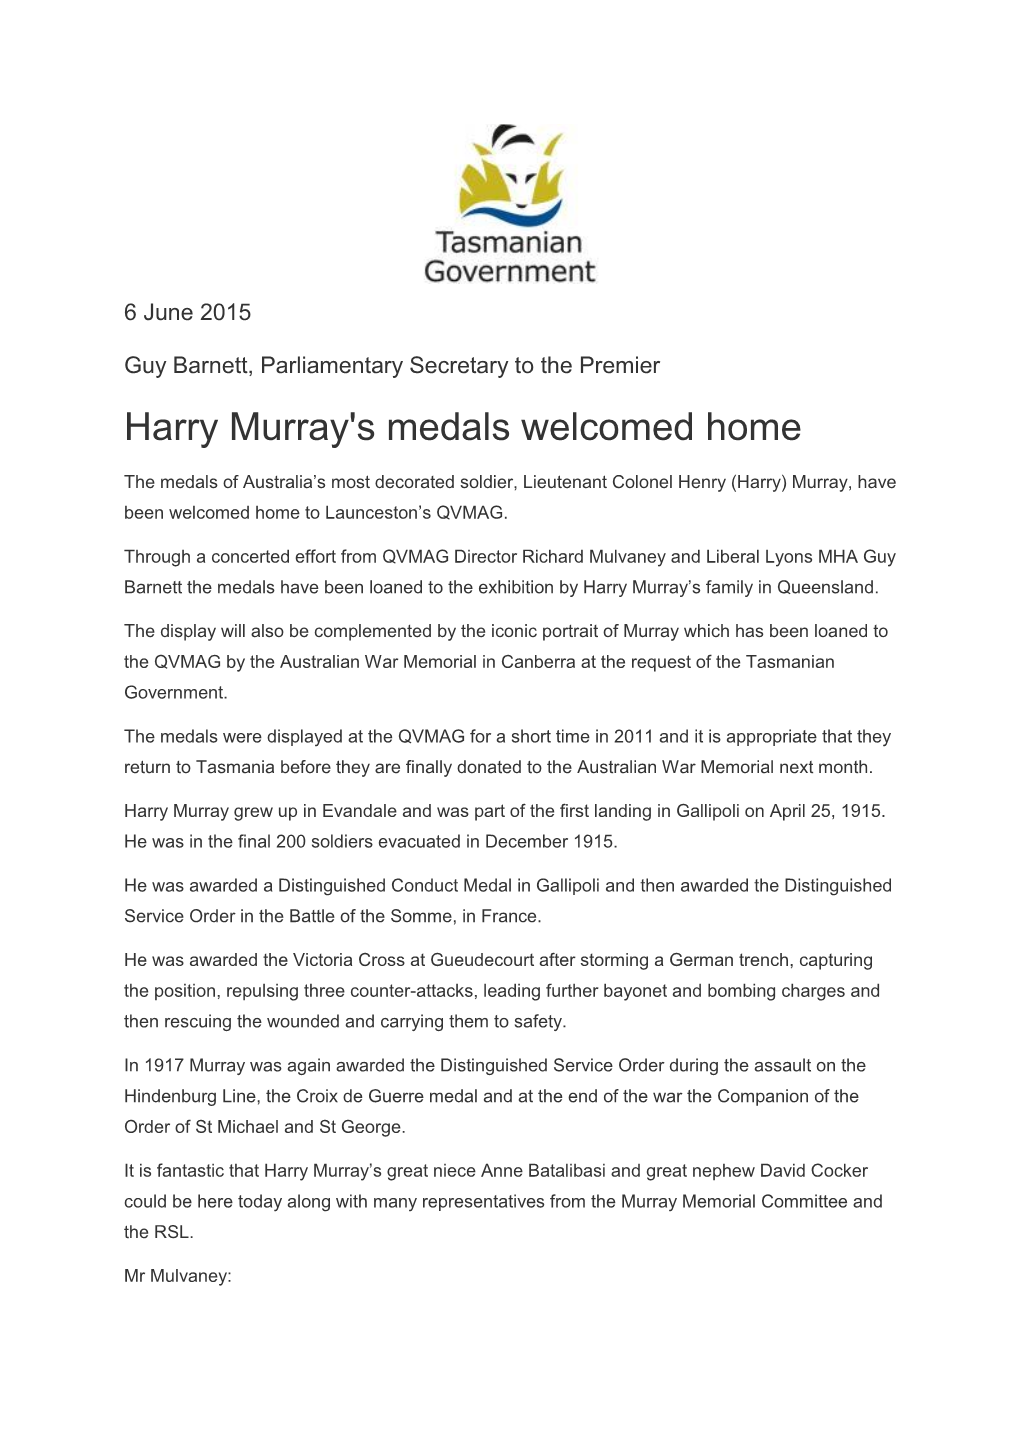 Harry Murray's Medals Welcomed Home